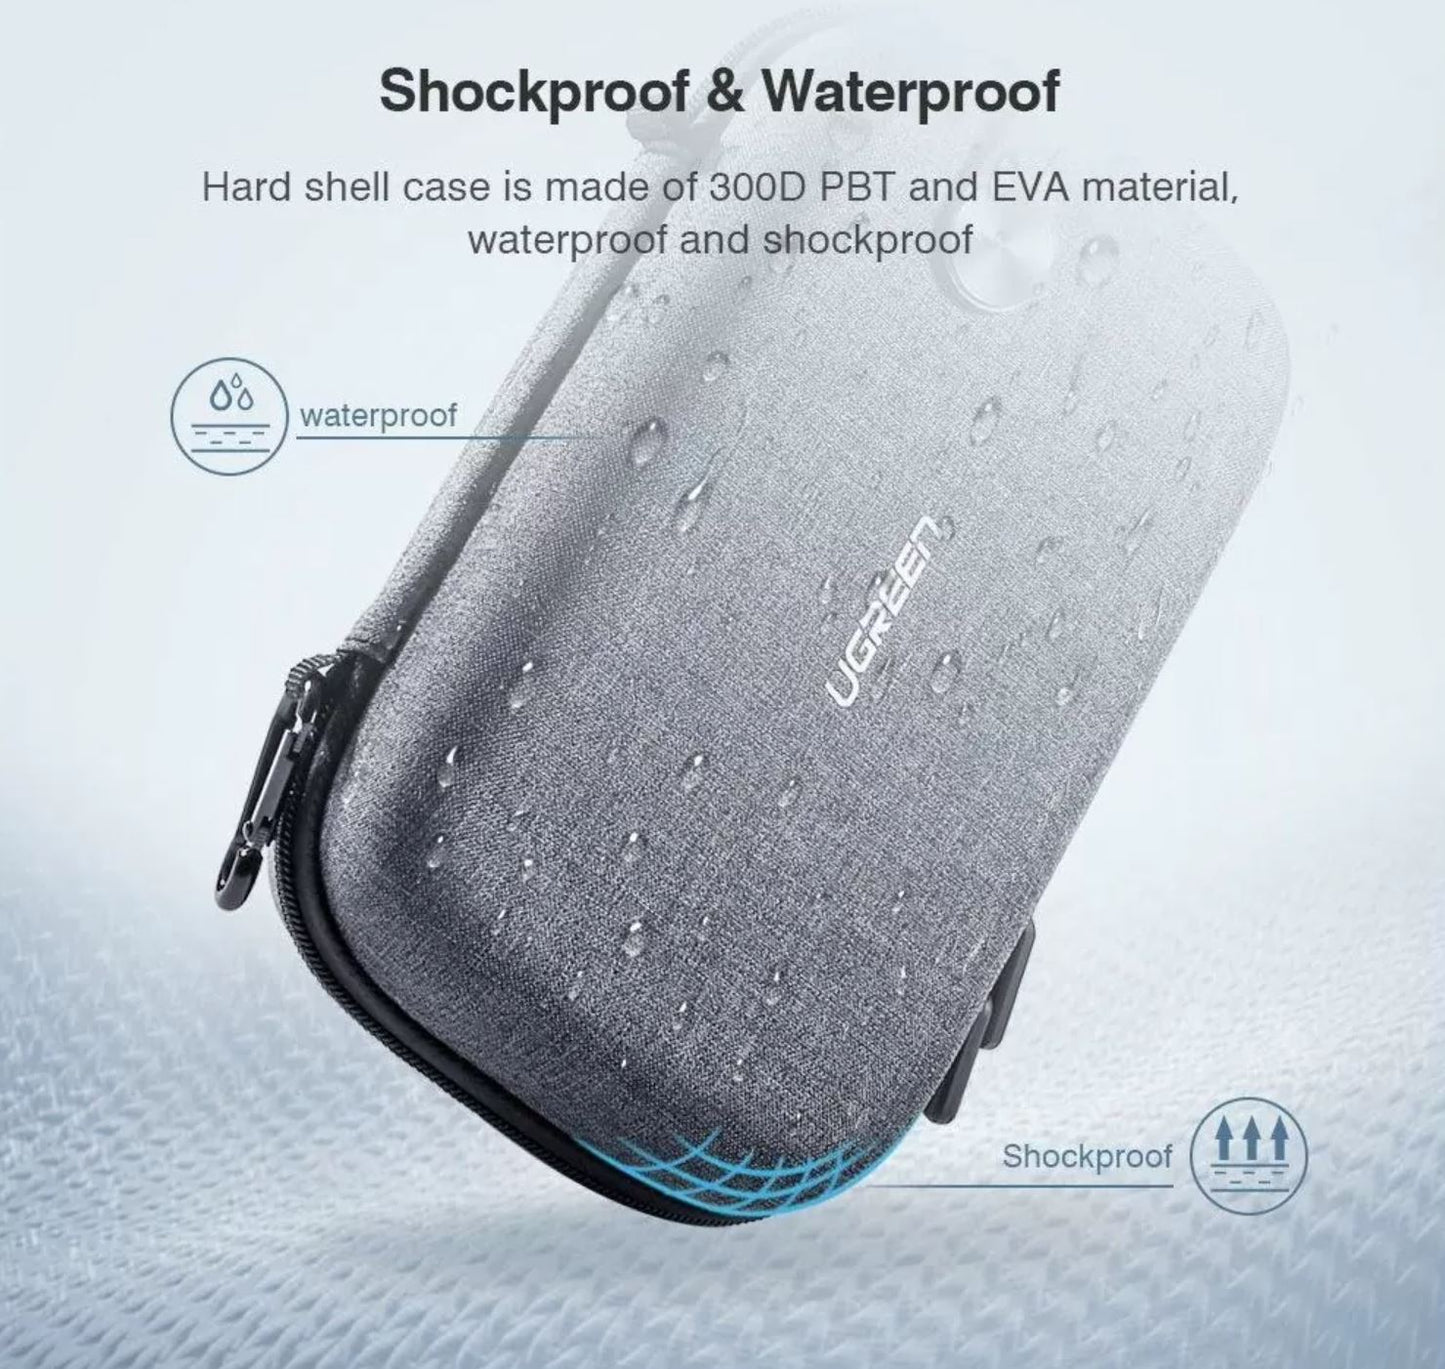 UGREEN Waterproof Shockproof Hard Case Travel Storage Organizer Bag for Gadgets HDD Hard Drive Data Cable Charger